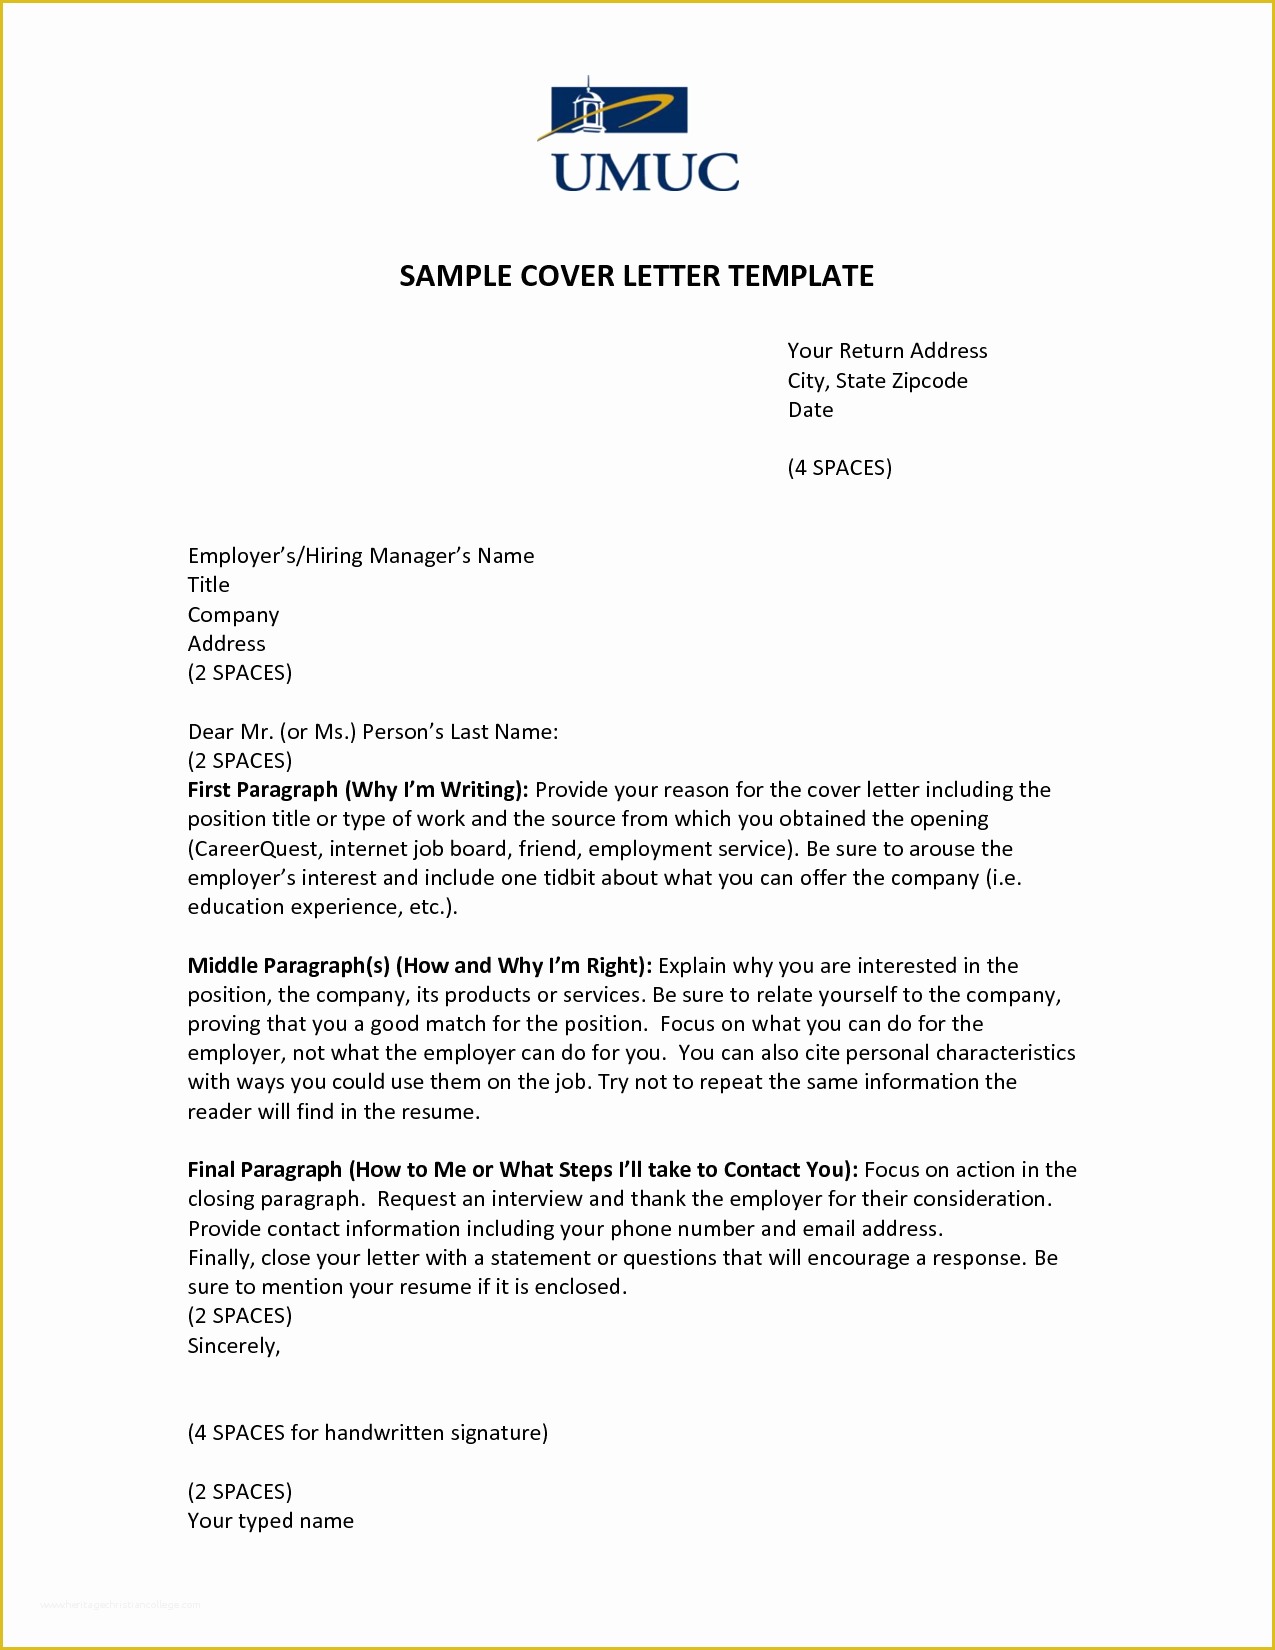 Free Matching Cover Letter and Resume Templates Of Sample Cover Letter Template Umucover Letter Template